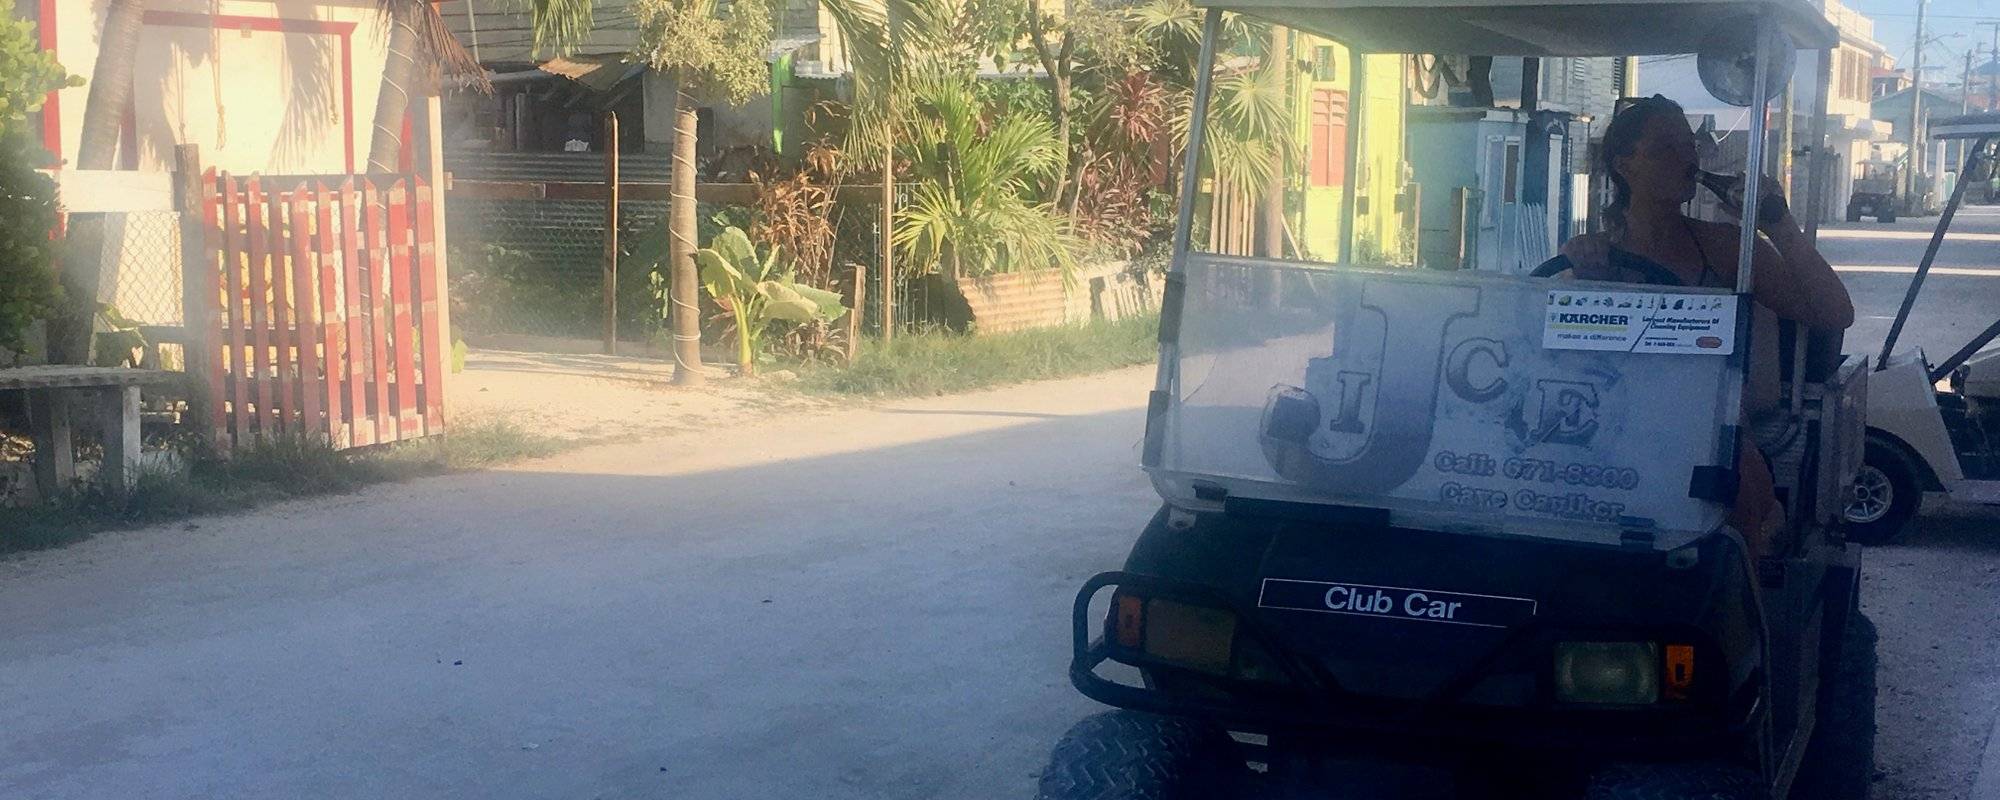 Belize Part 1 -  Discovering the beautiful Caribbean Island of Caye Caulker in a Golf Cart  (Fotos + Videos)